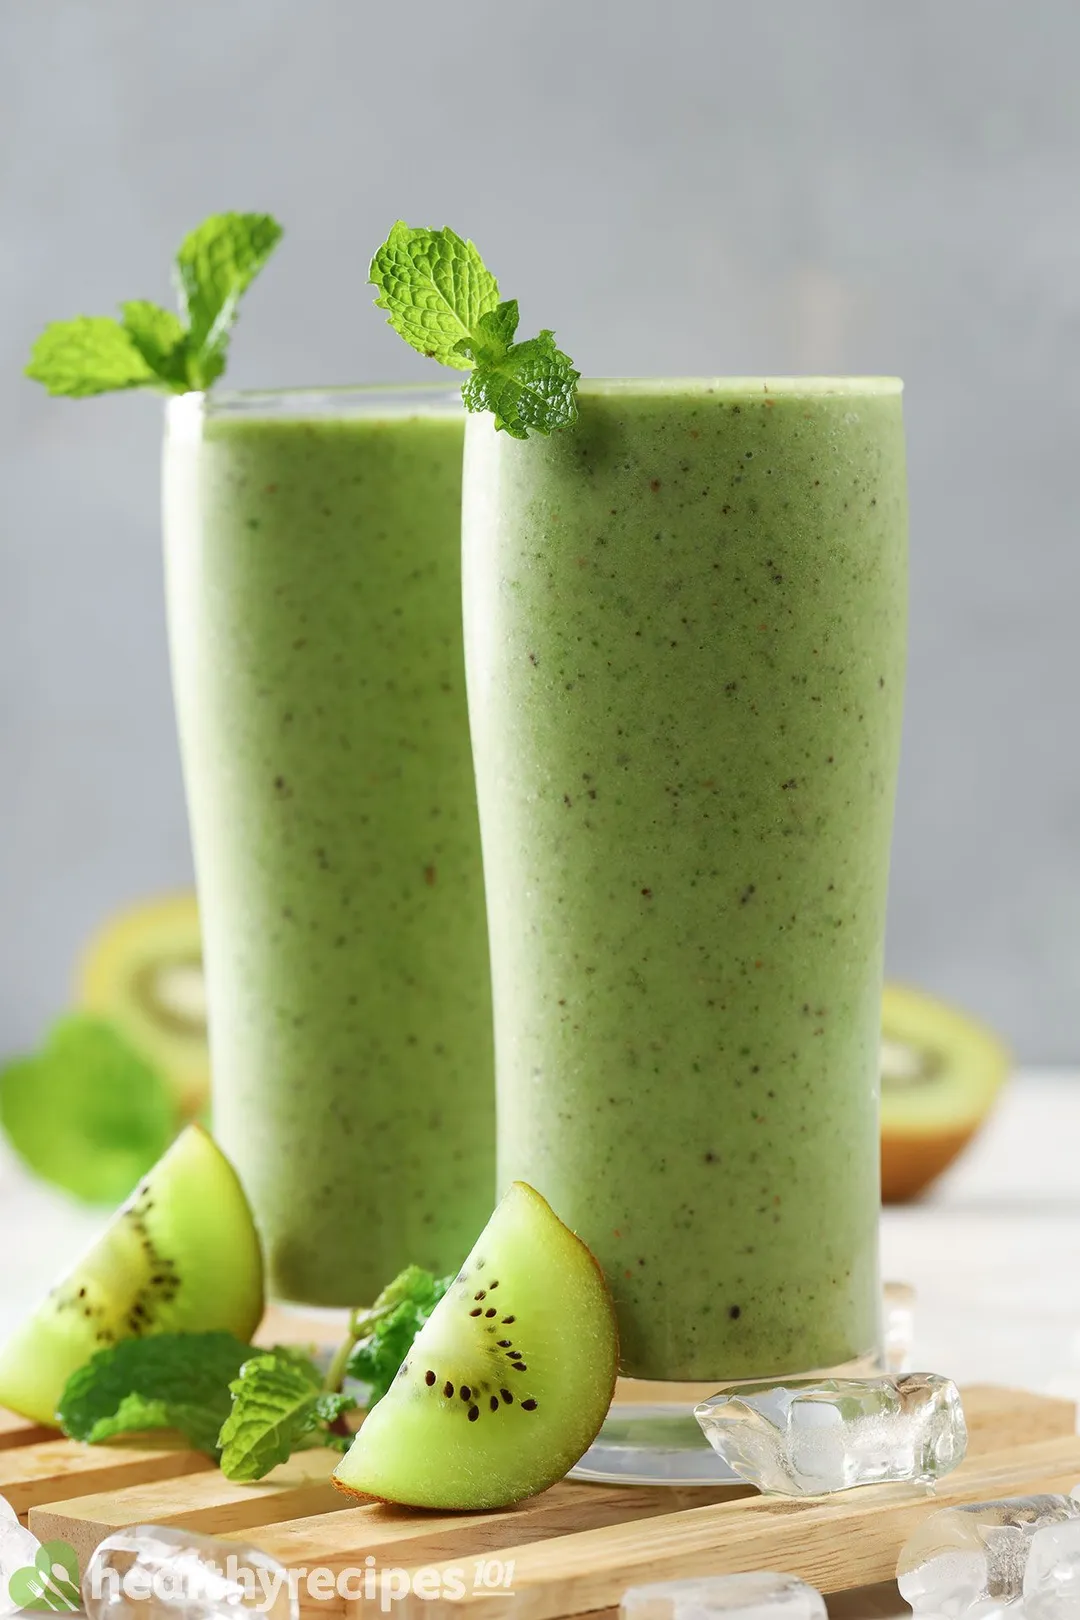 Recipe for Kiwi Smoothie - Go Eat Green Easy Weight-Loss Breakfast